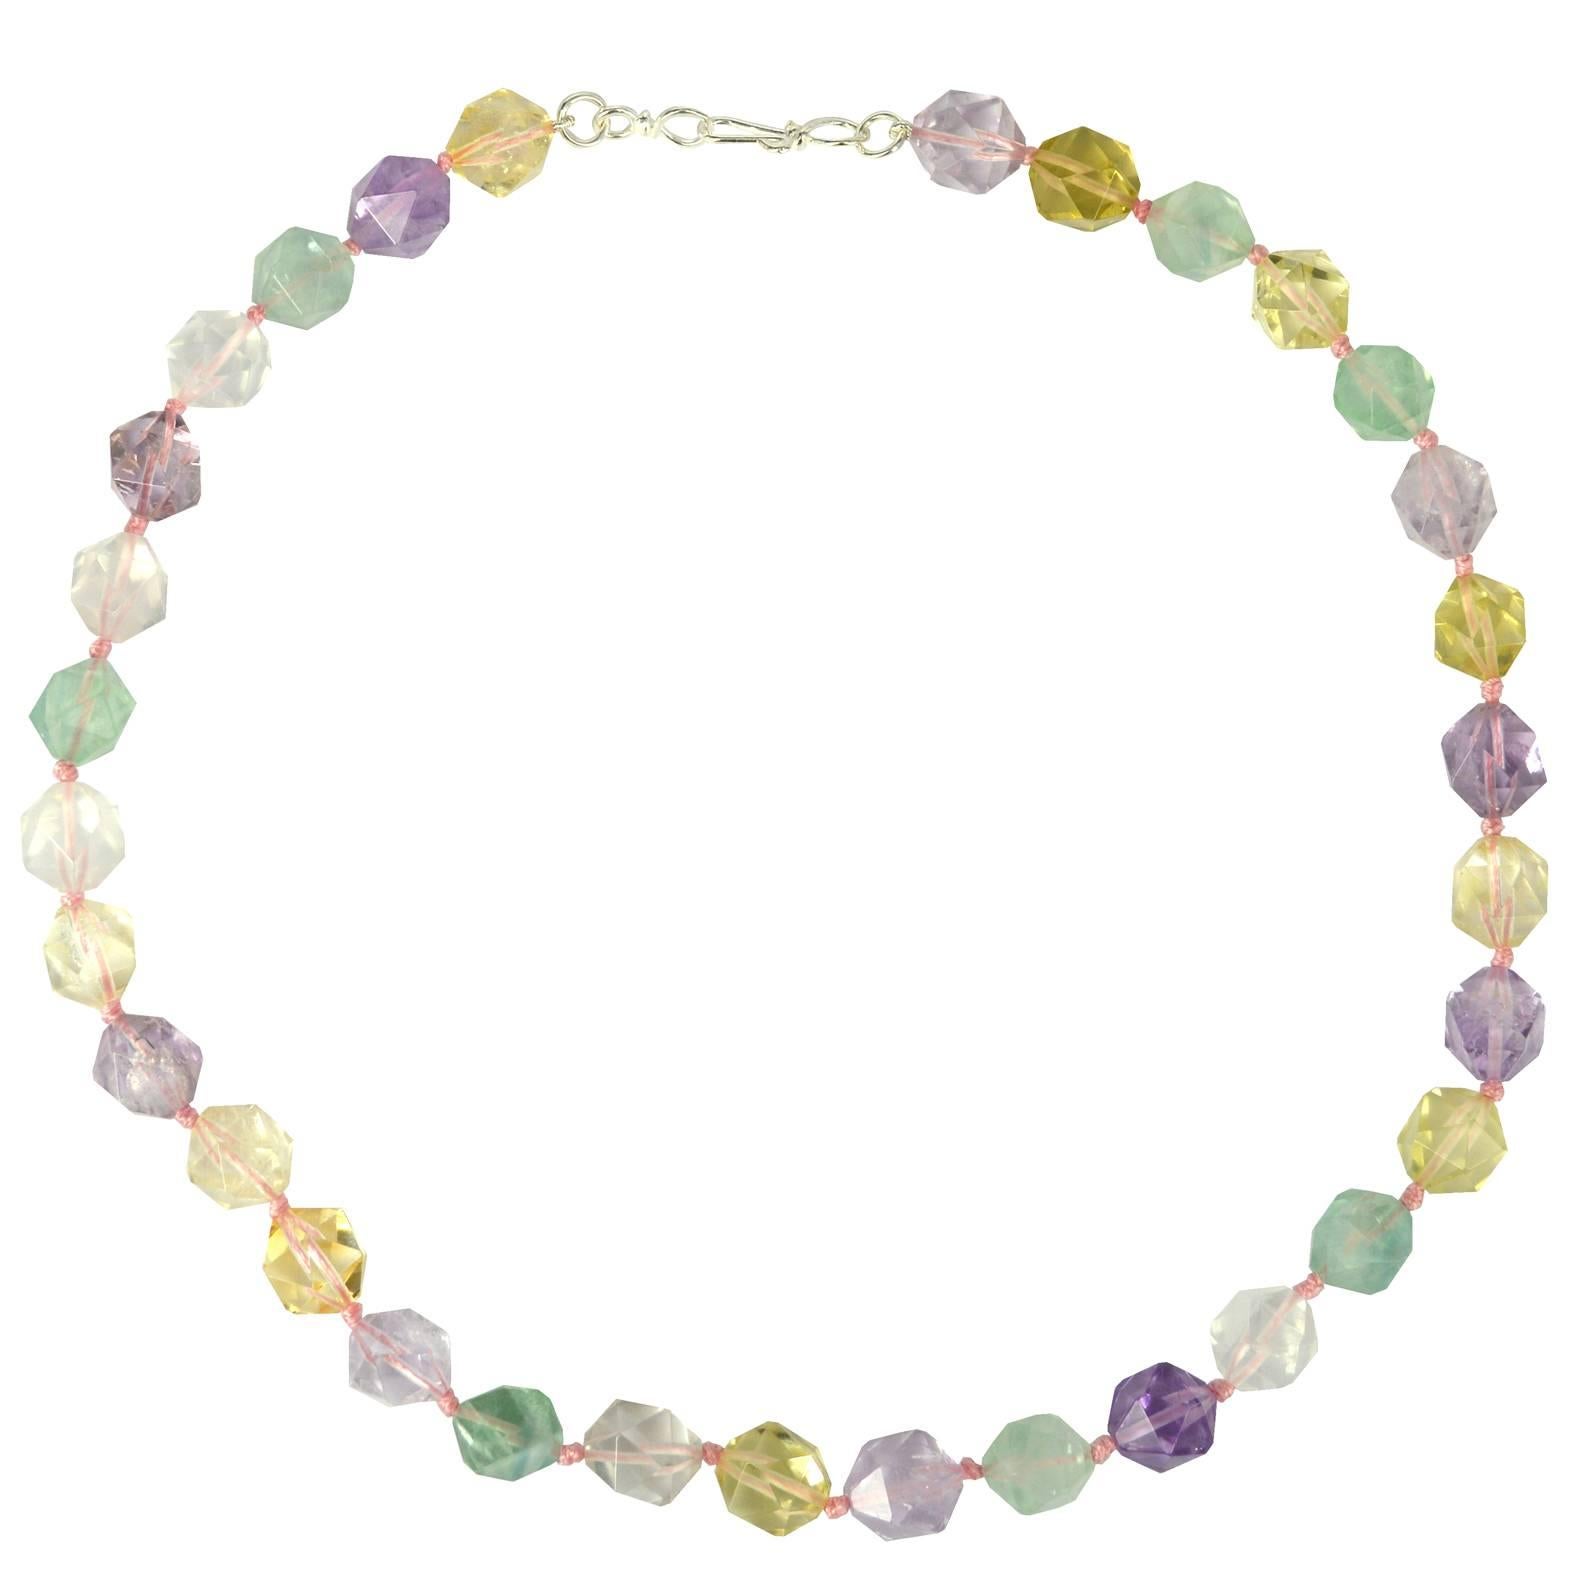 Amethyst, Citrine, Lemon quartz, Rose Quartz and Prehnite Faceted 10mm star cut with a 40mm Sterling Silver hook Clasp, hand knotted for strength and durability.

Finished necklace measures 47.5cm.


Custom modification available on request
Hand